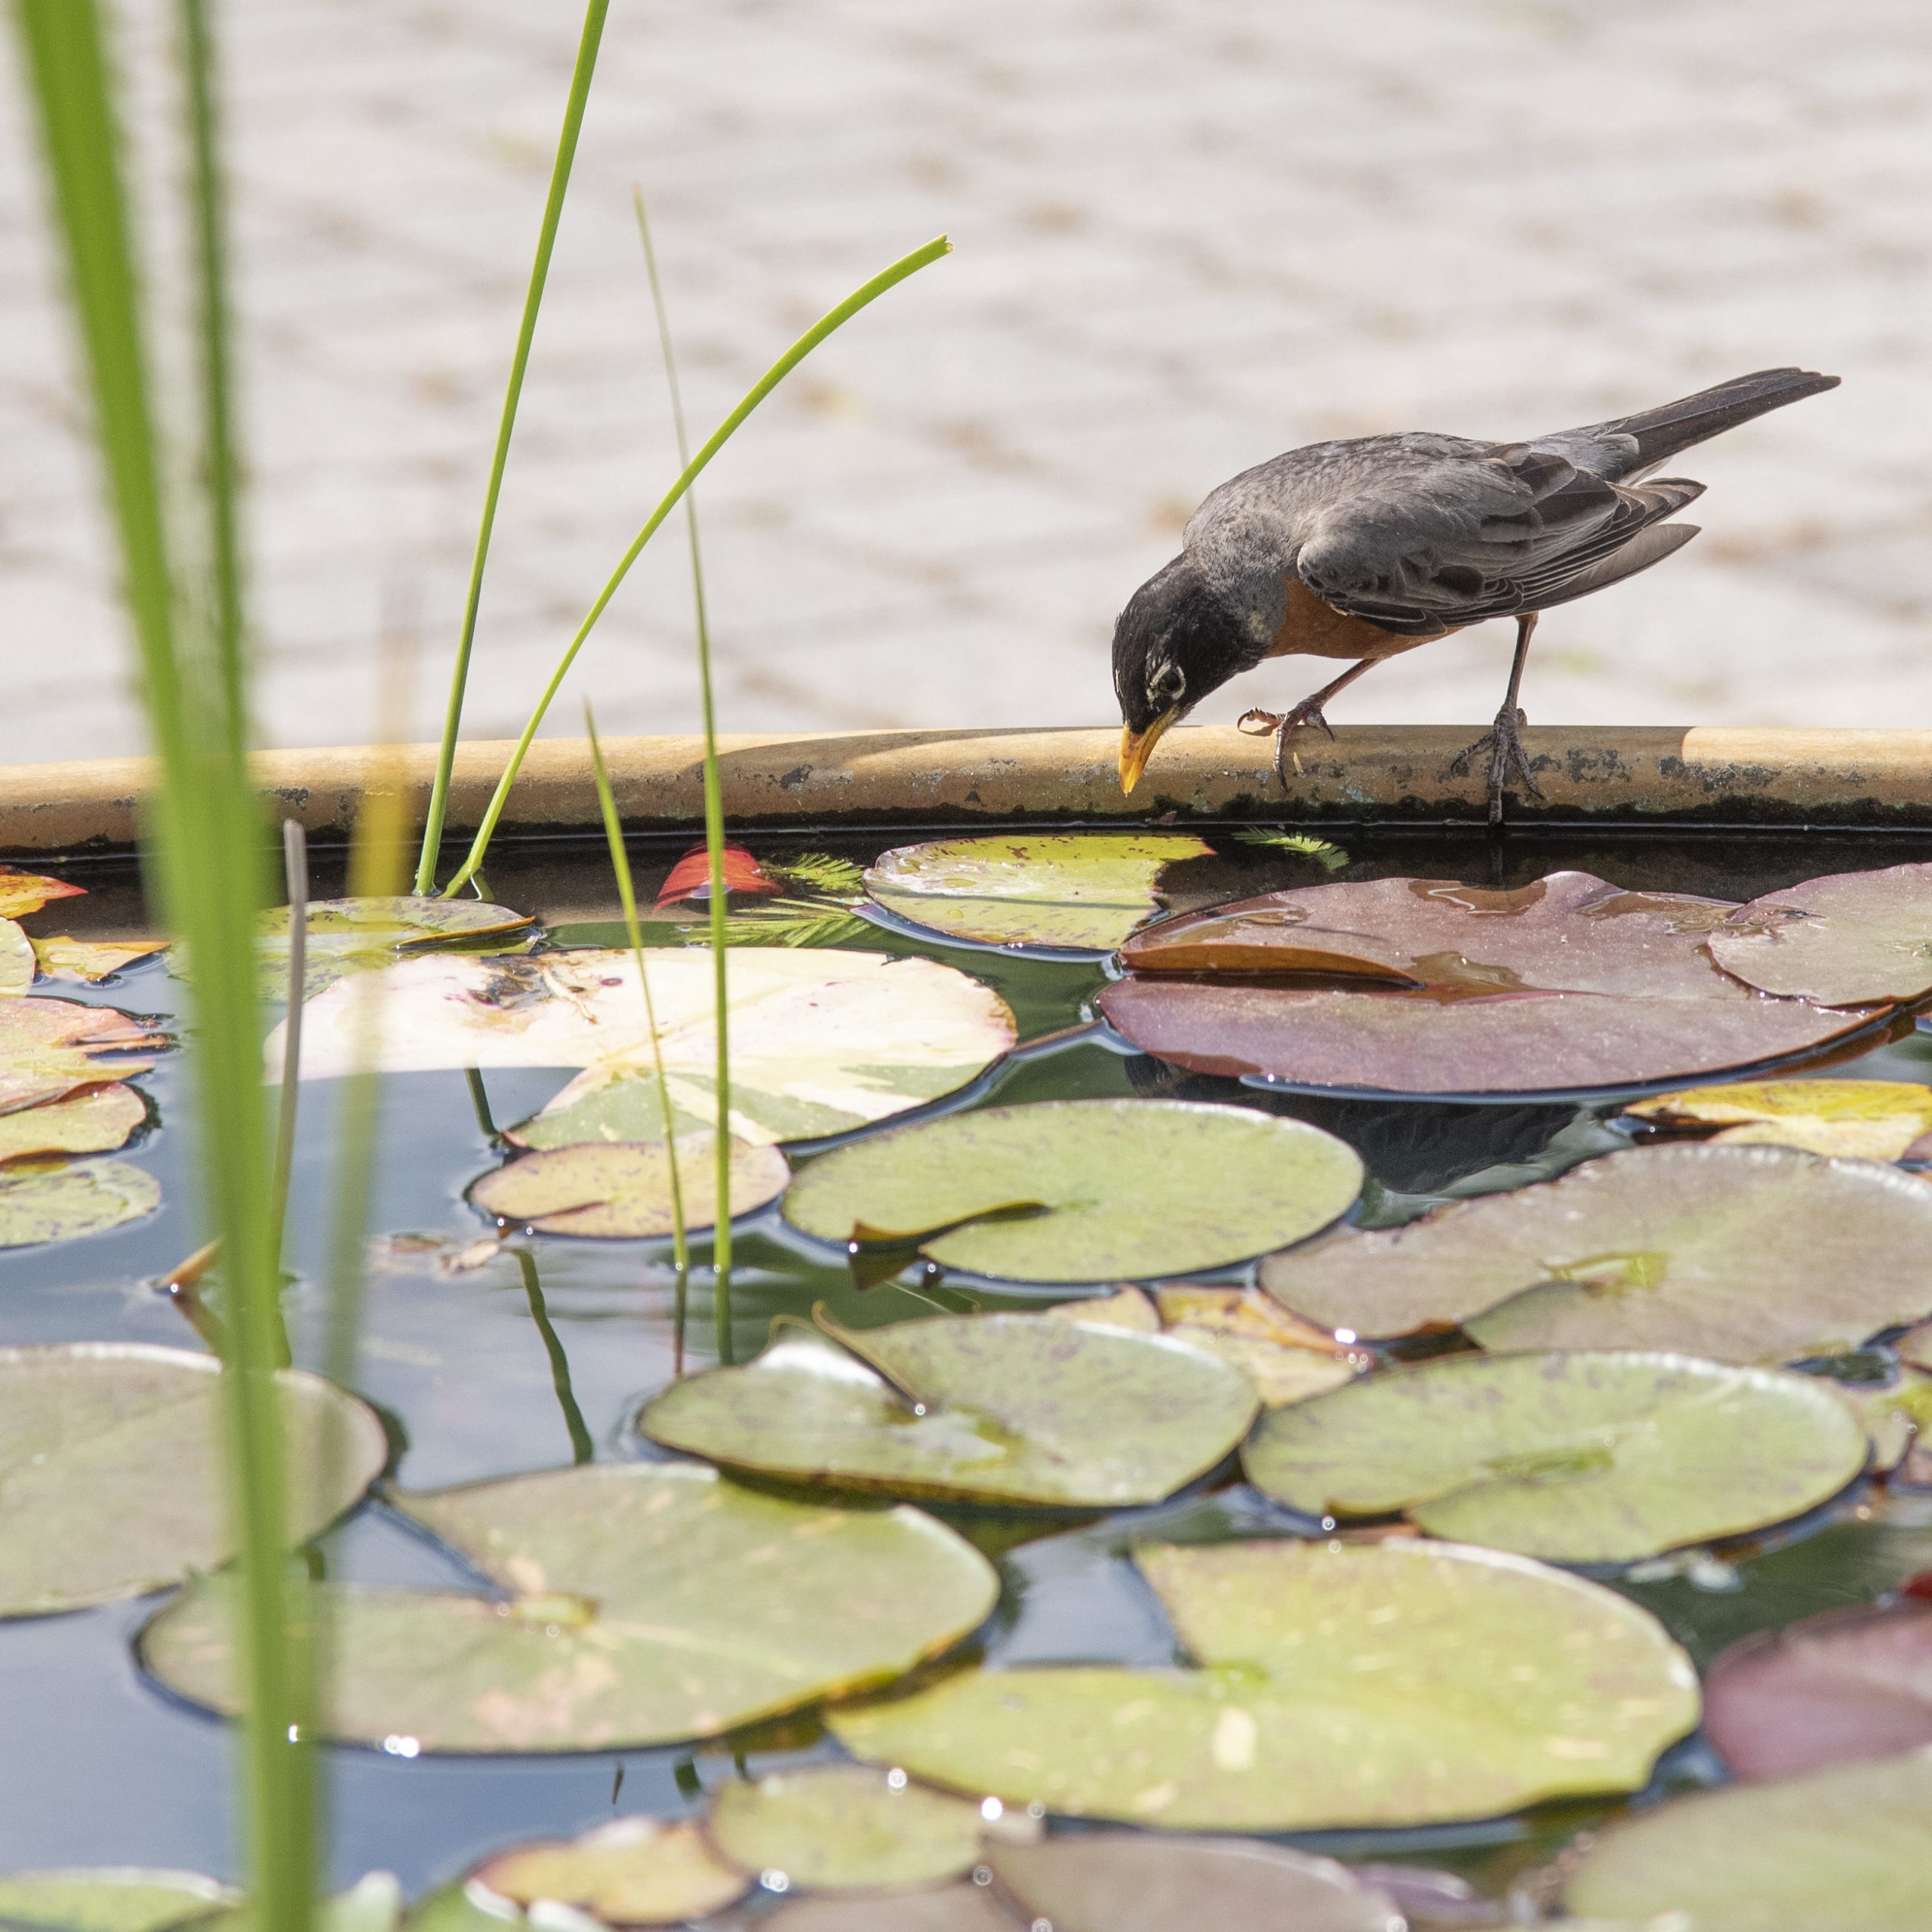 Bird sits on edge of water feature full of Lilly pads and grasses 